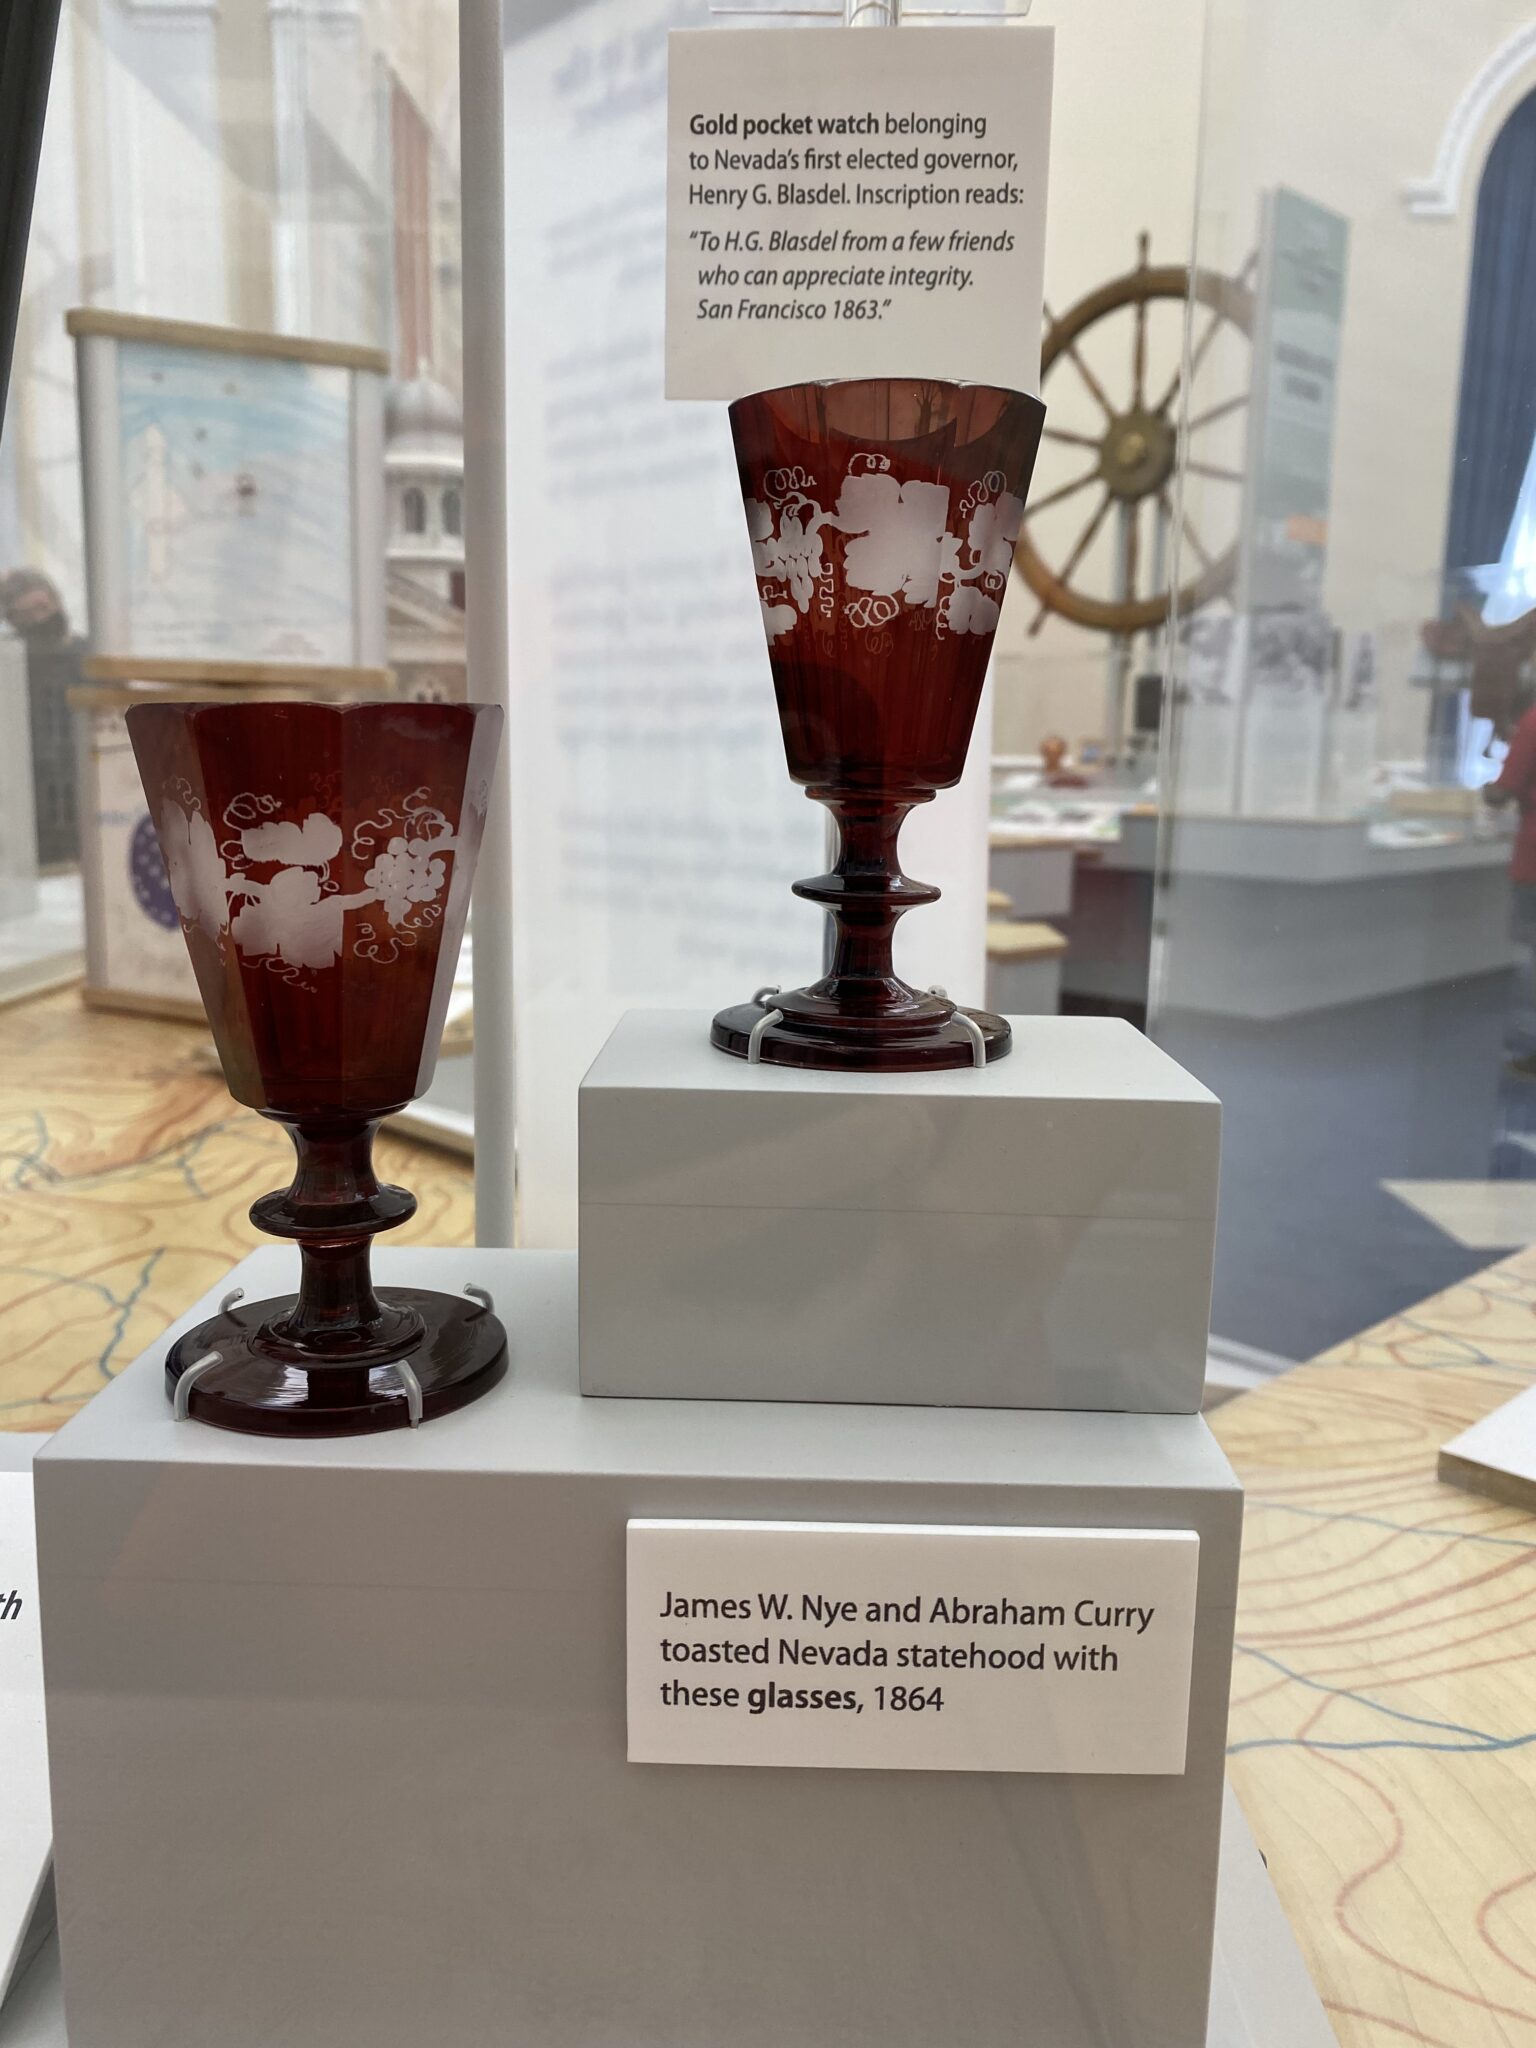 These glasses were used to toast Nevada statehood in 1864 by James W. Nye, governor of the Nevada Territory and a future U.S. Senator, and Abraham Curry, the founder of Carson City.  